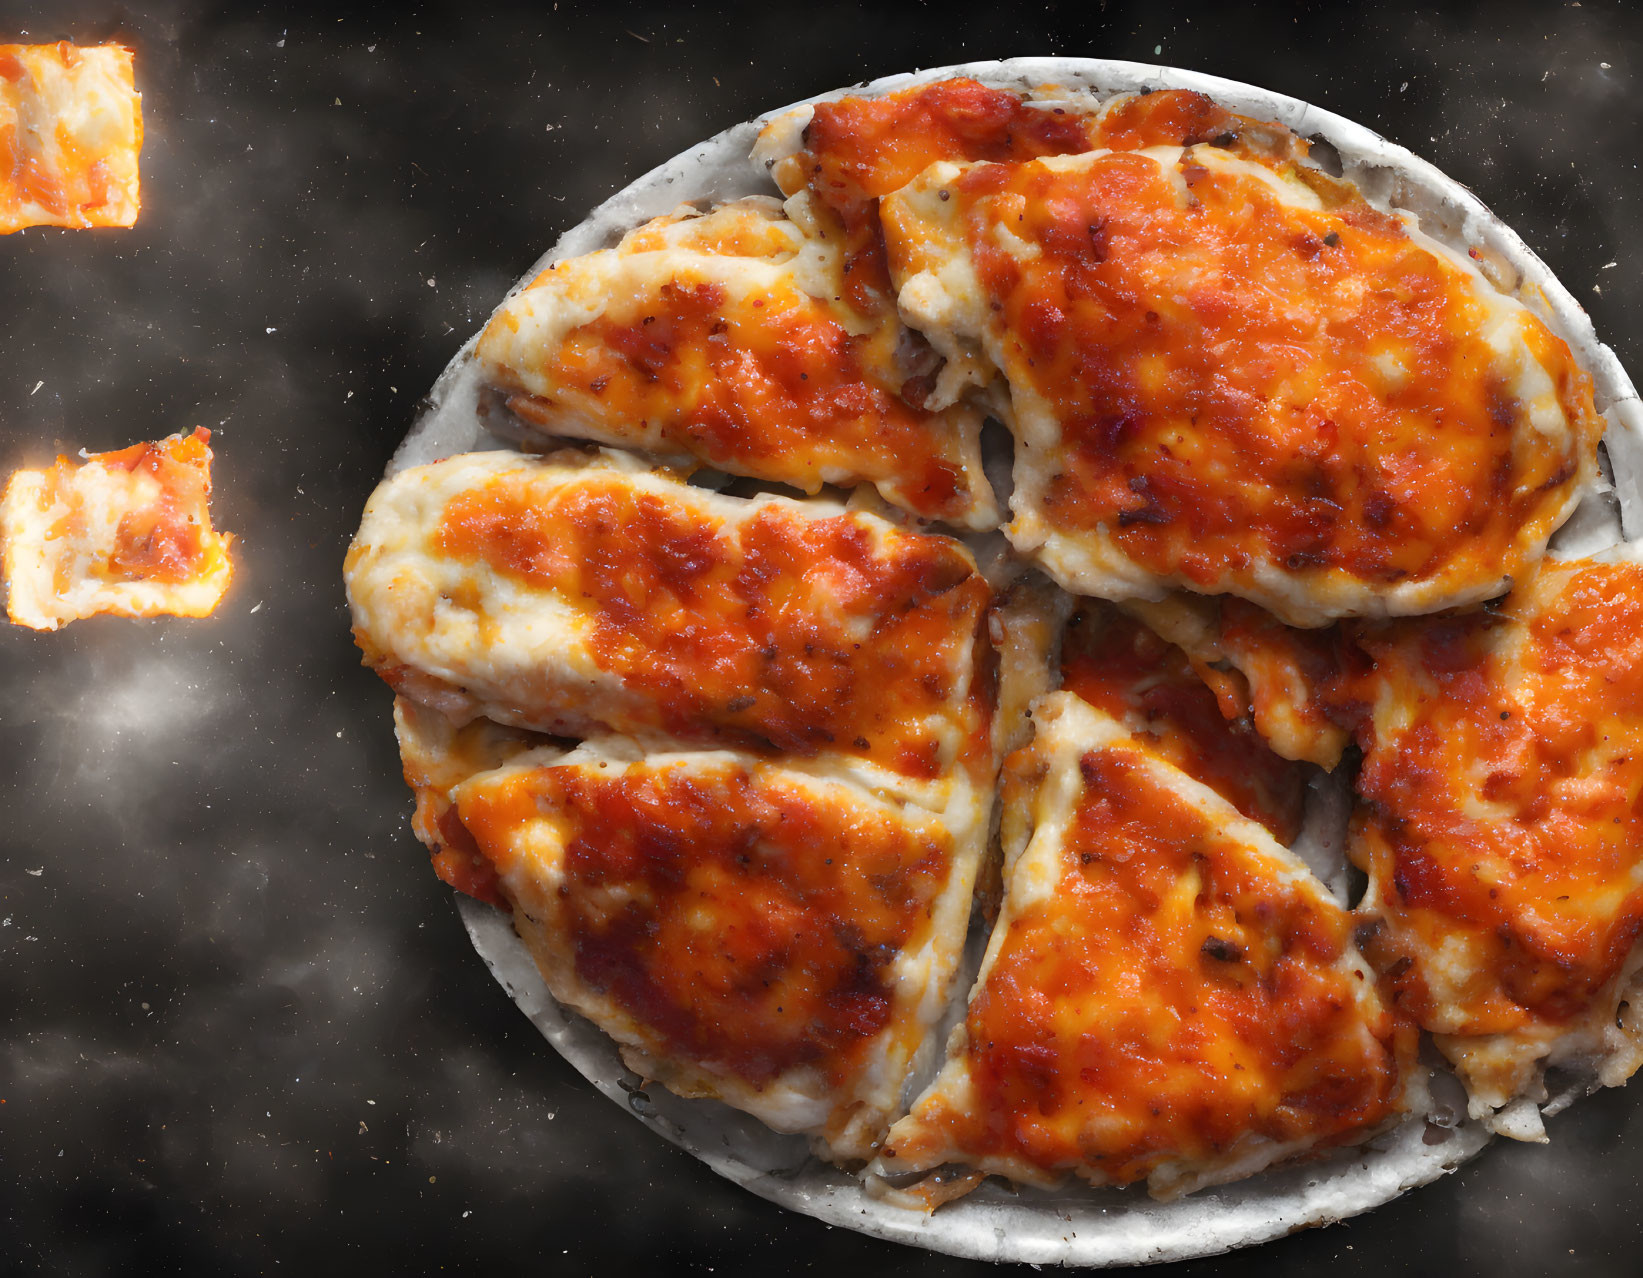 Cheese Pizza Slices on Golden Crust, Space-themed Background